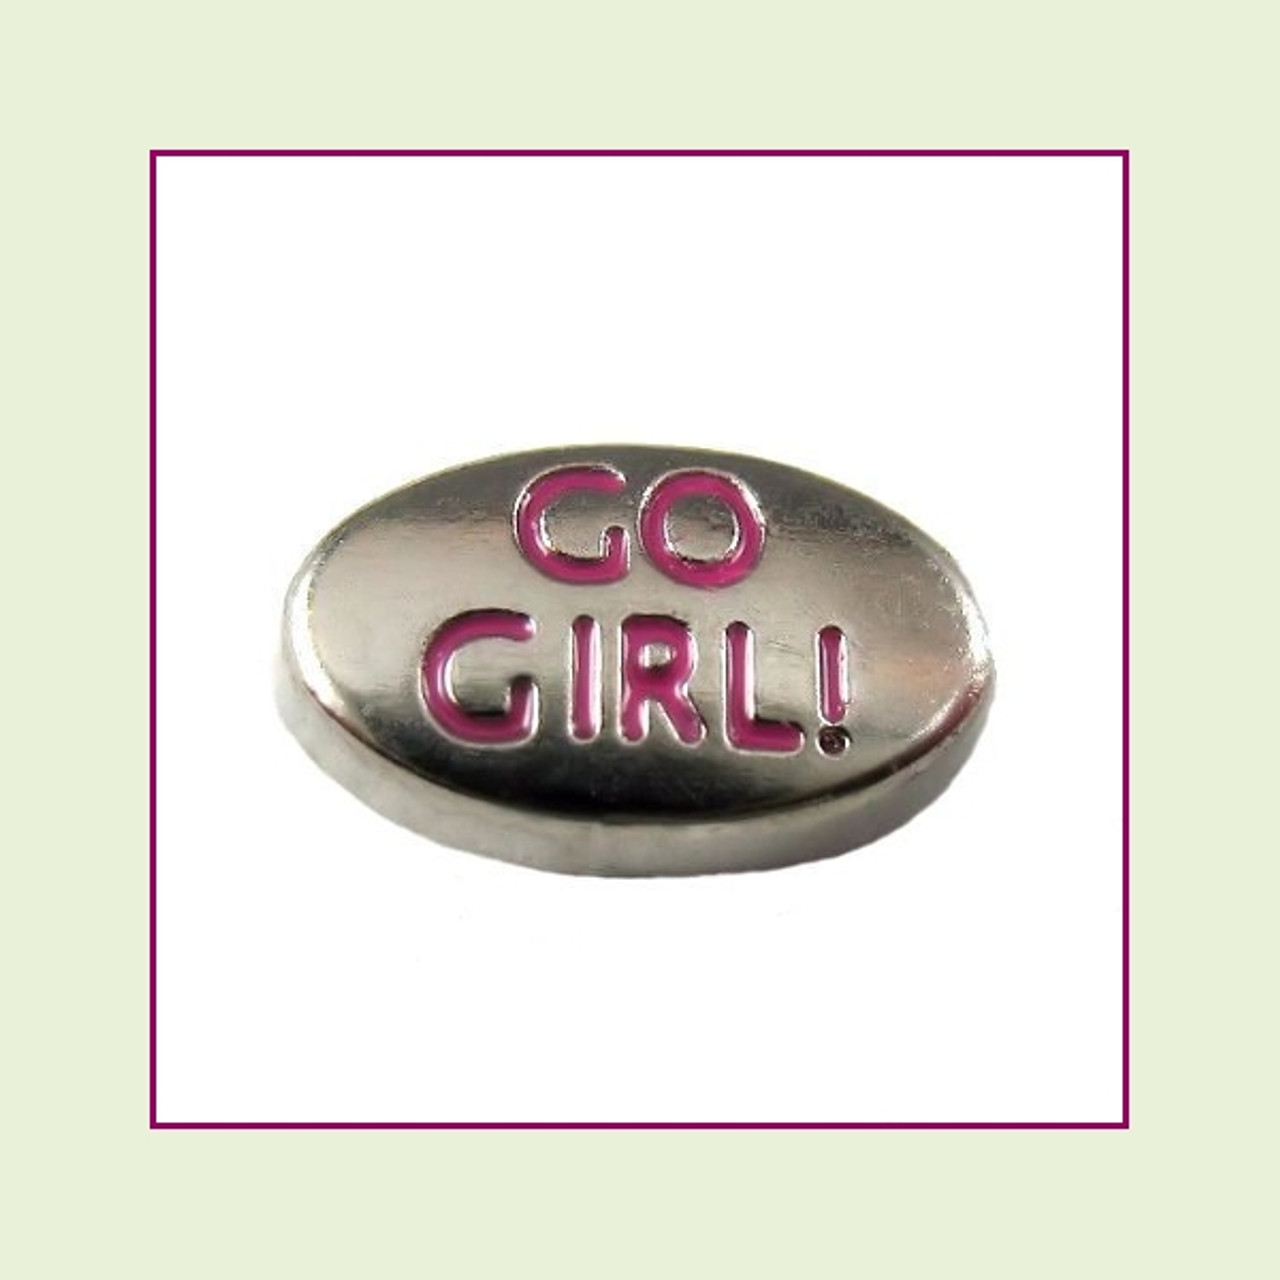 Go Girl on Silver Oval Floating Charm